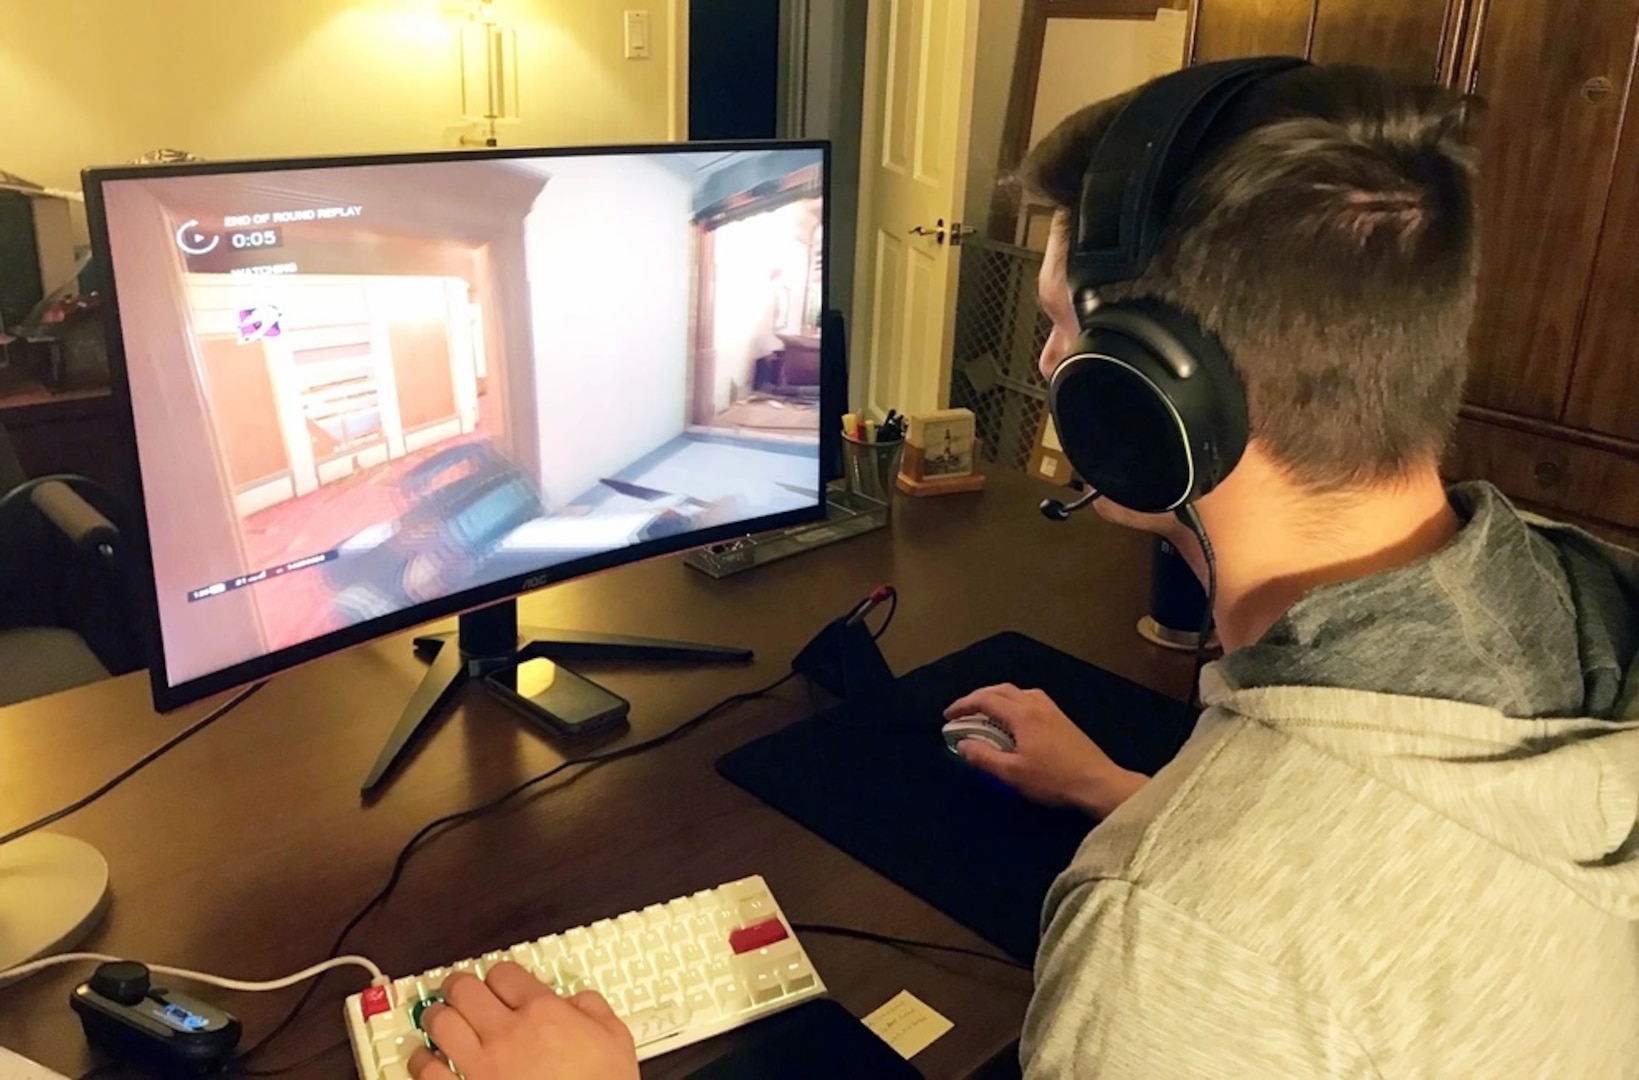 Class of 2021 Cadet Ben "Fern" Fernquist, a member of West Point's esports team, plays Tom Clancy's Rainbow Six Siege against competitors from Ole Miss during a Collegiate Rainbow Six match April 17. Ole Miss defeated West Point 2-0 in the best of three competition. (Photo courtesy of the West Point esports team)